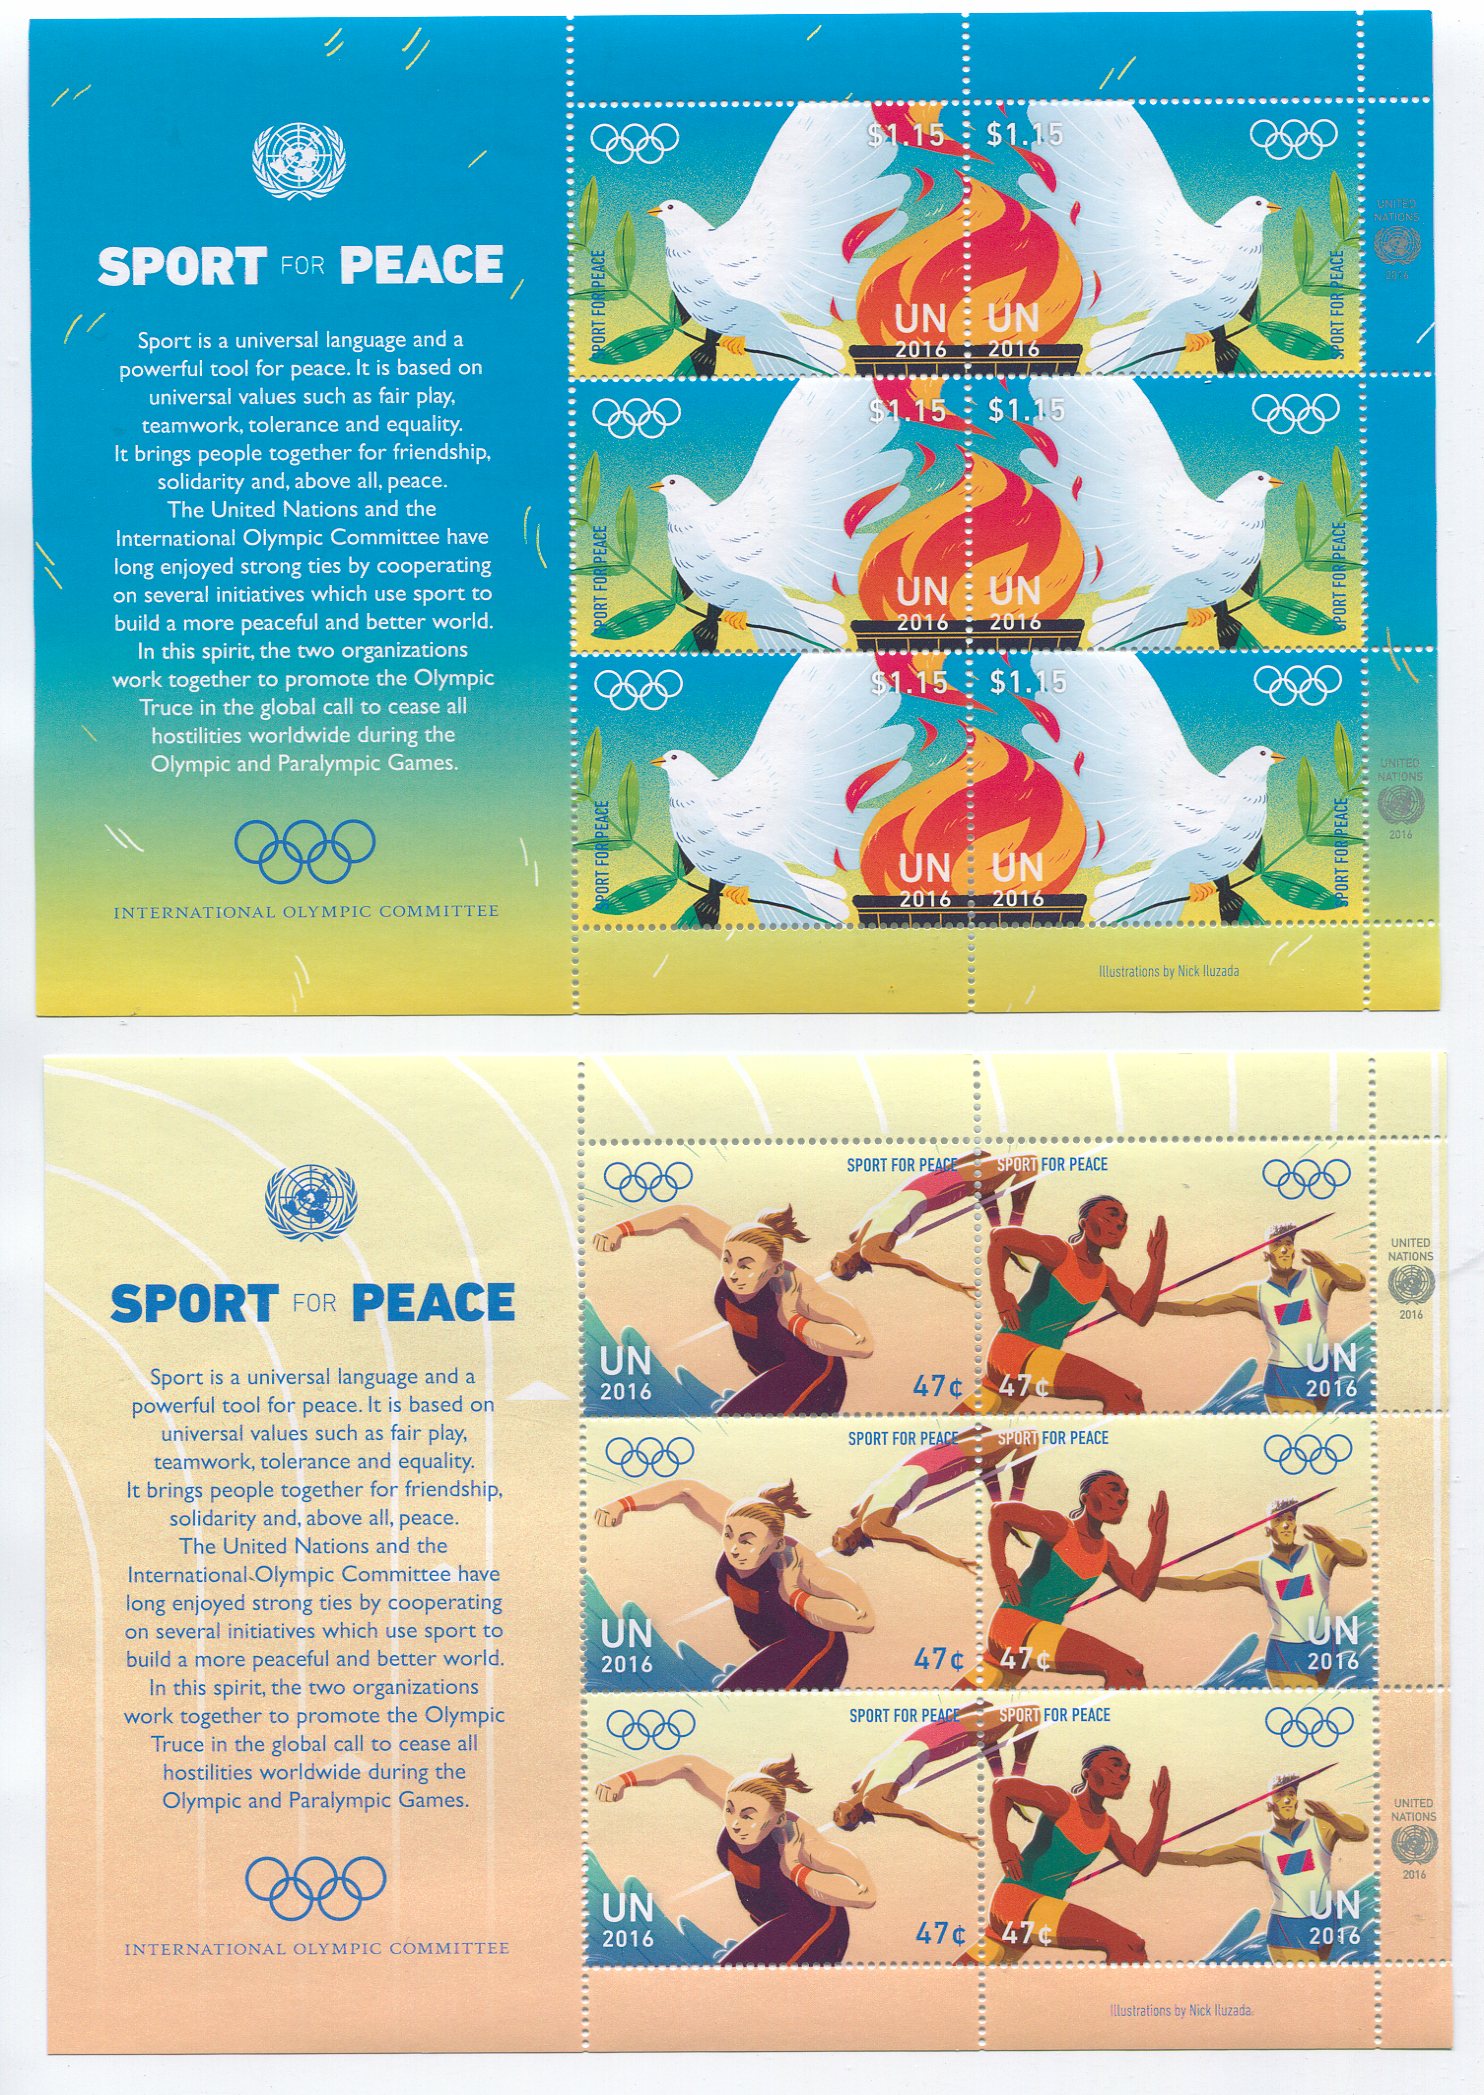 UNNY 1137-40 47c,1.15 Sport For Peace 2 Sheets of 6 #ny1137-40shset